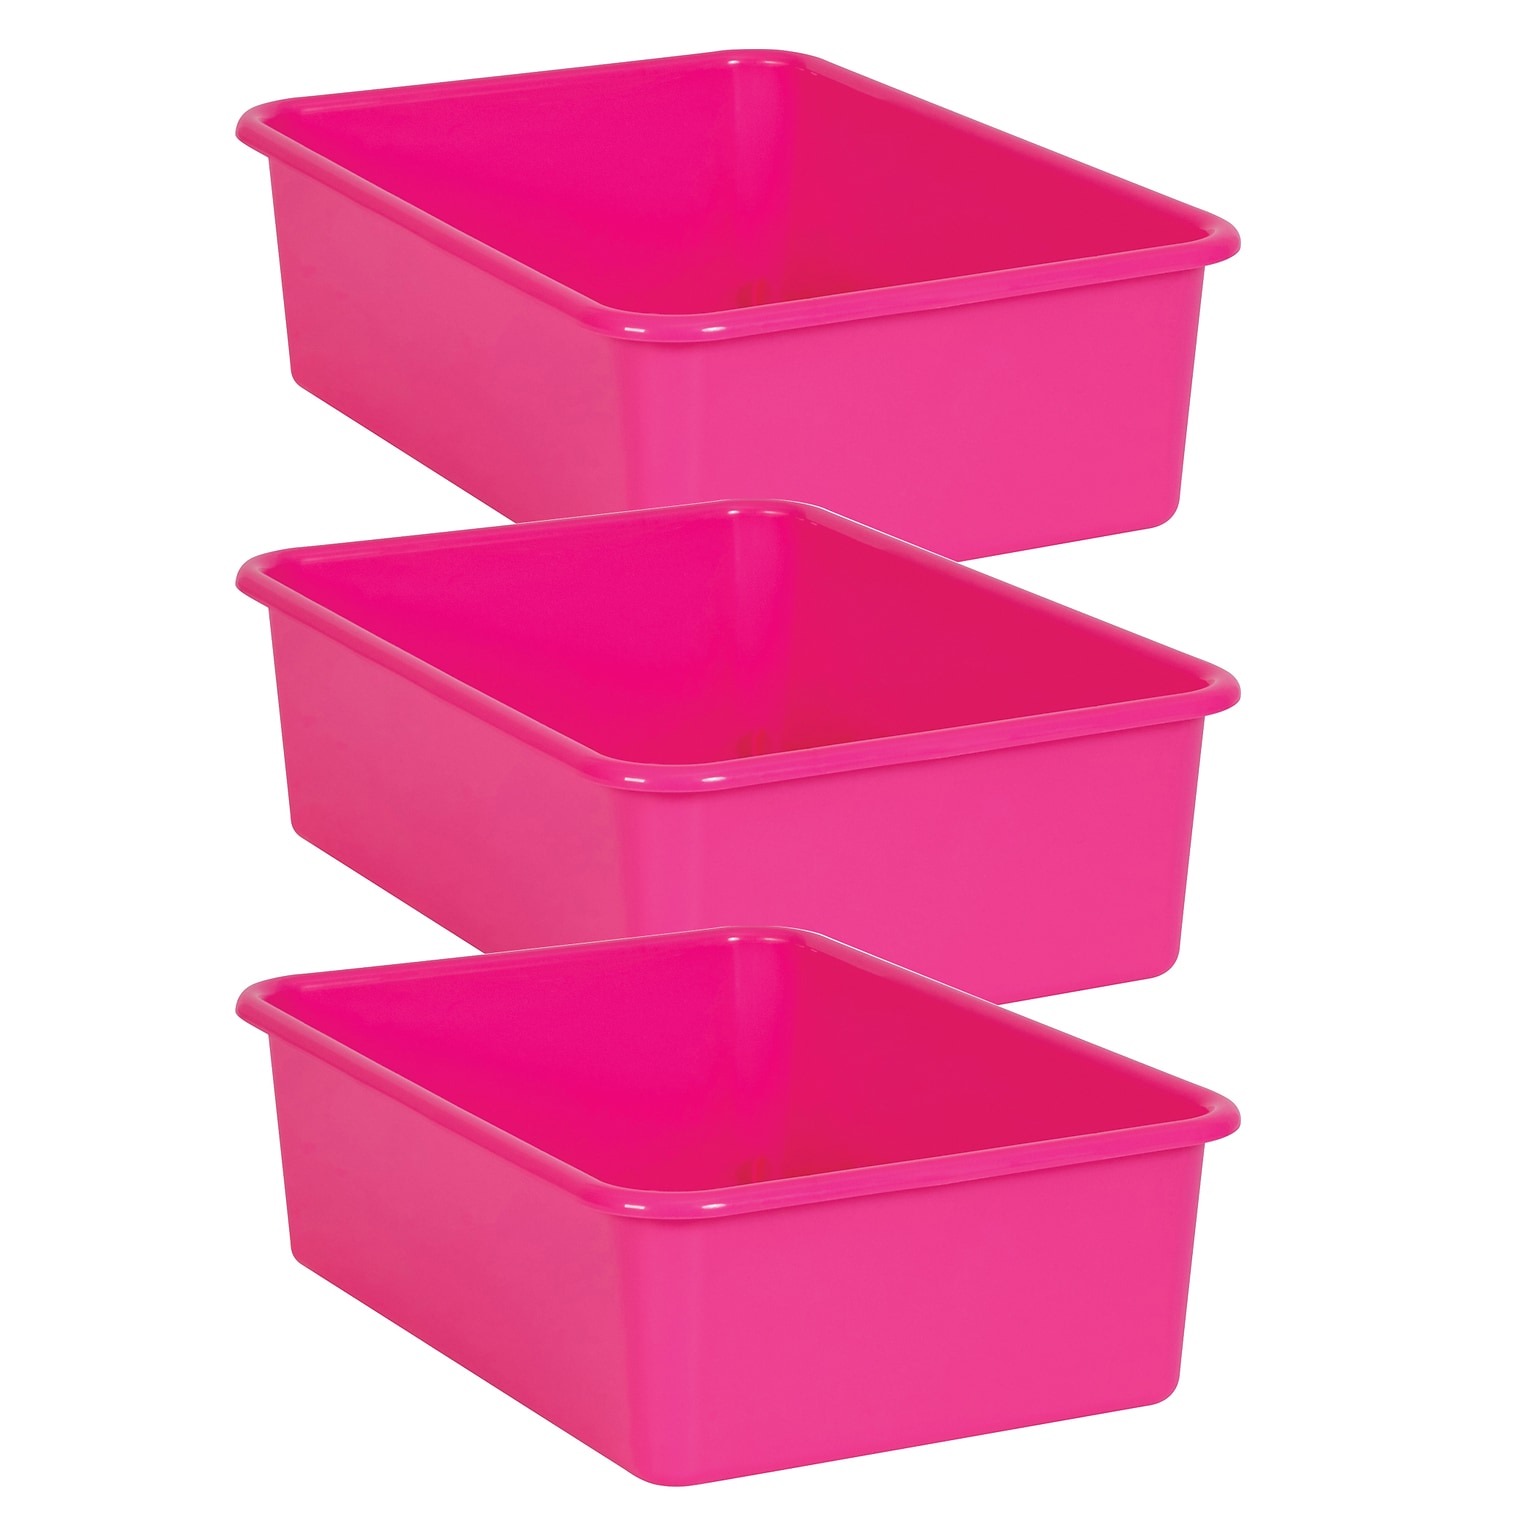 Teacher Created Resources® Plastic Storage Bin, Large, 16.25 x 11.5 x 5, Pink, Pack of 3 (TCR20408-3)